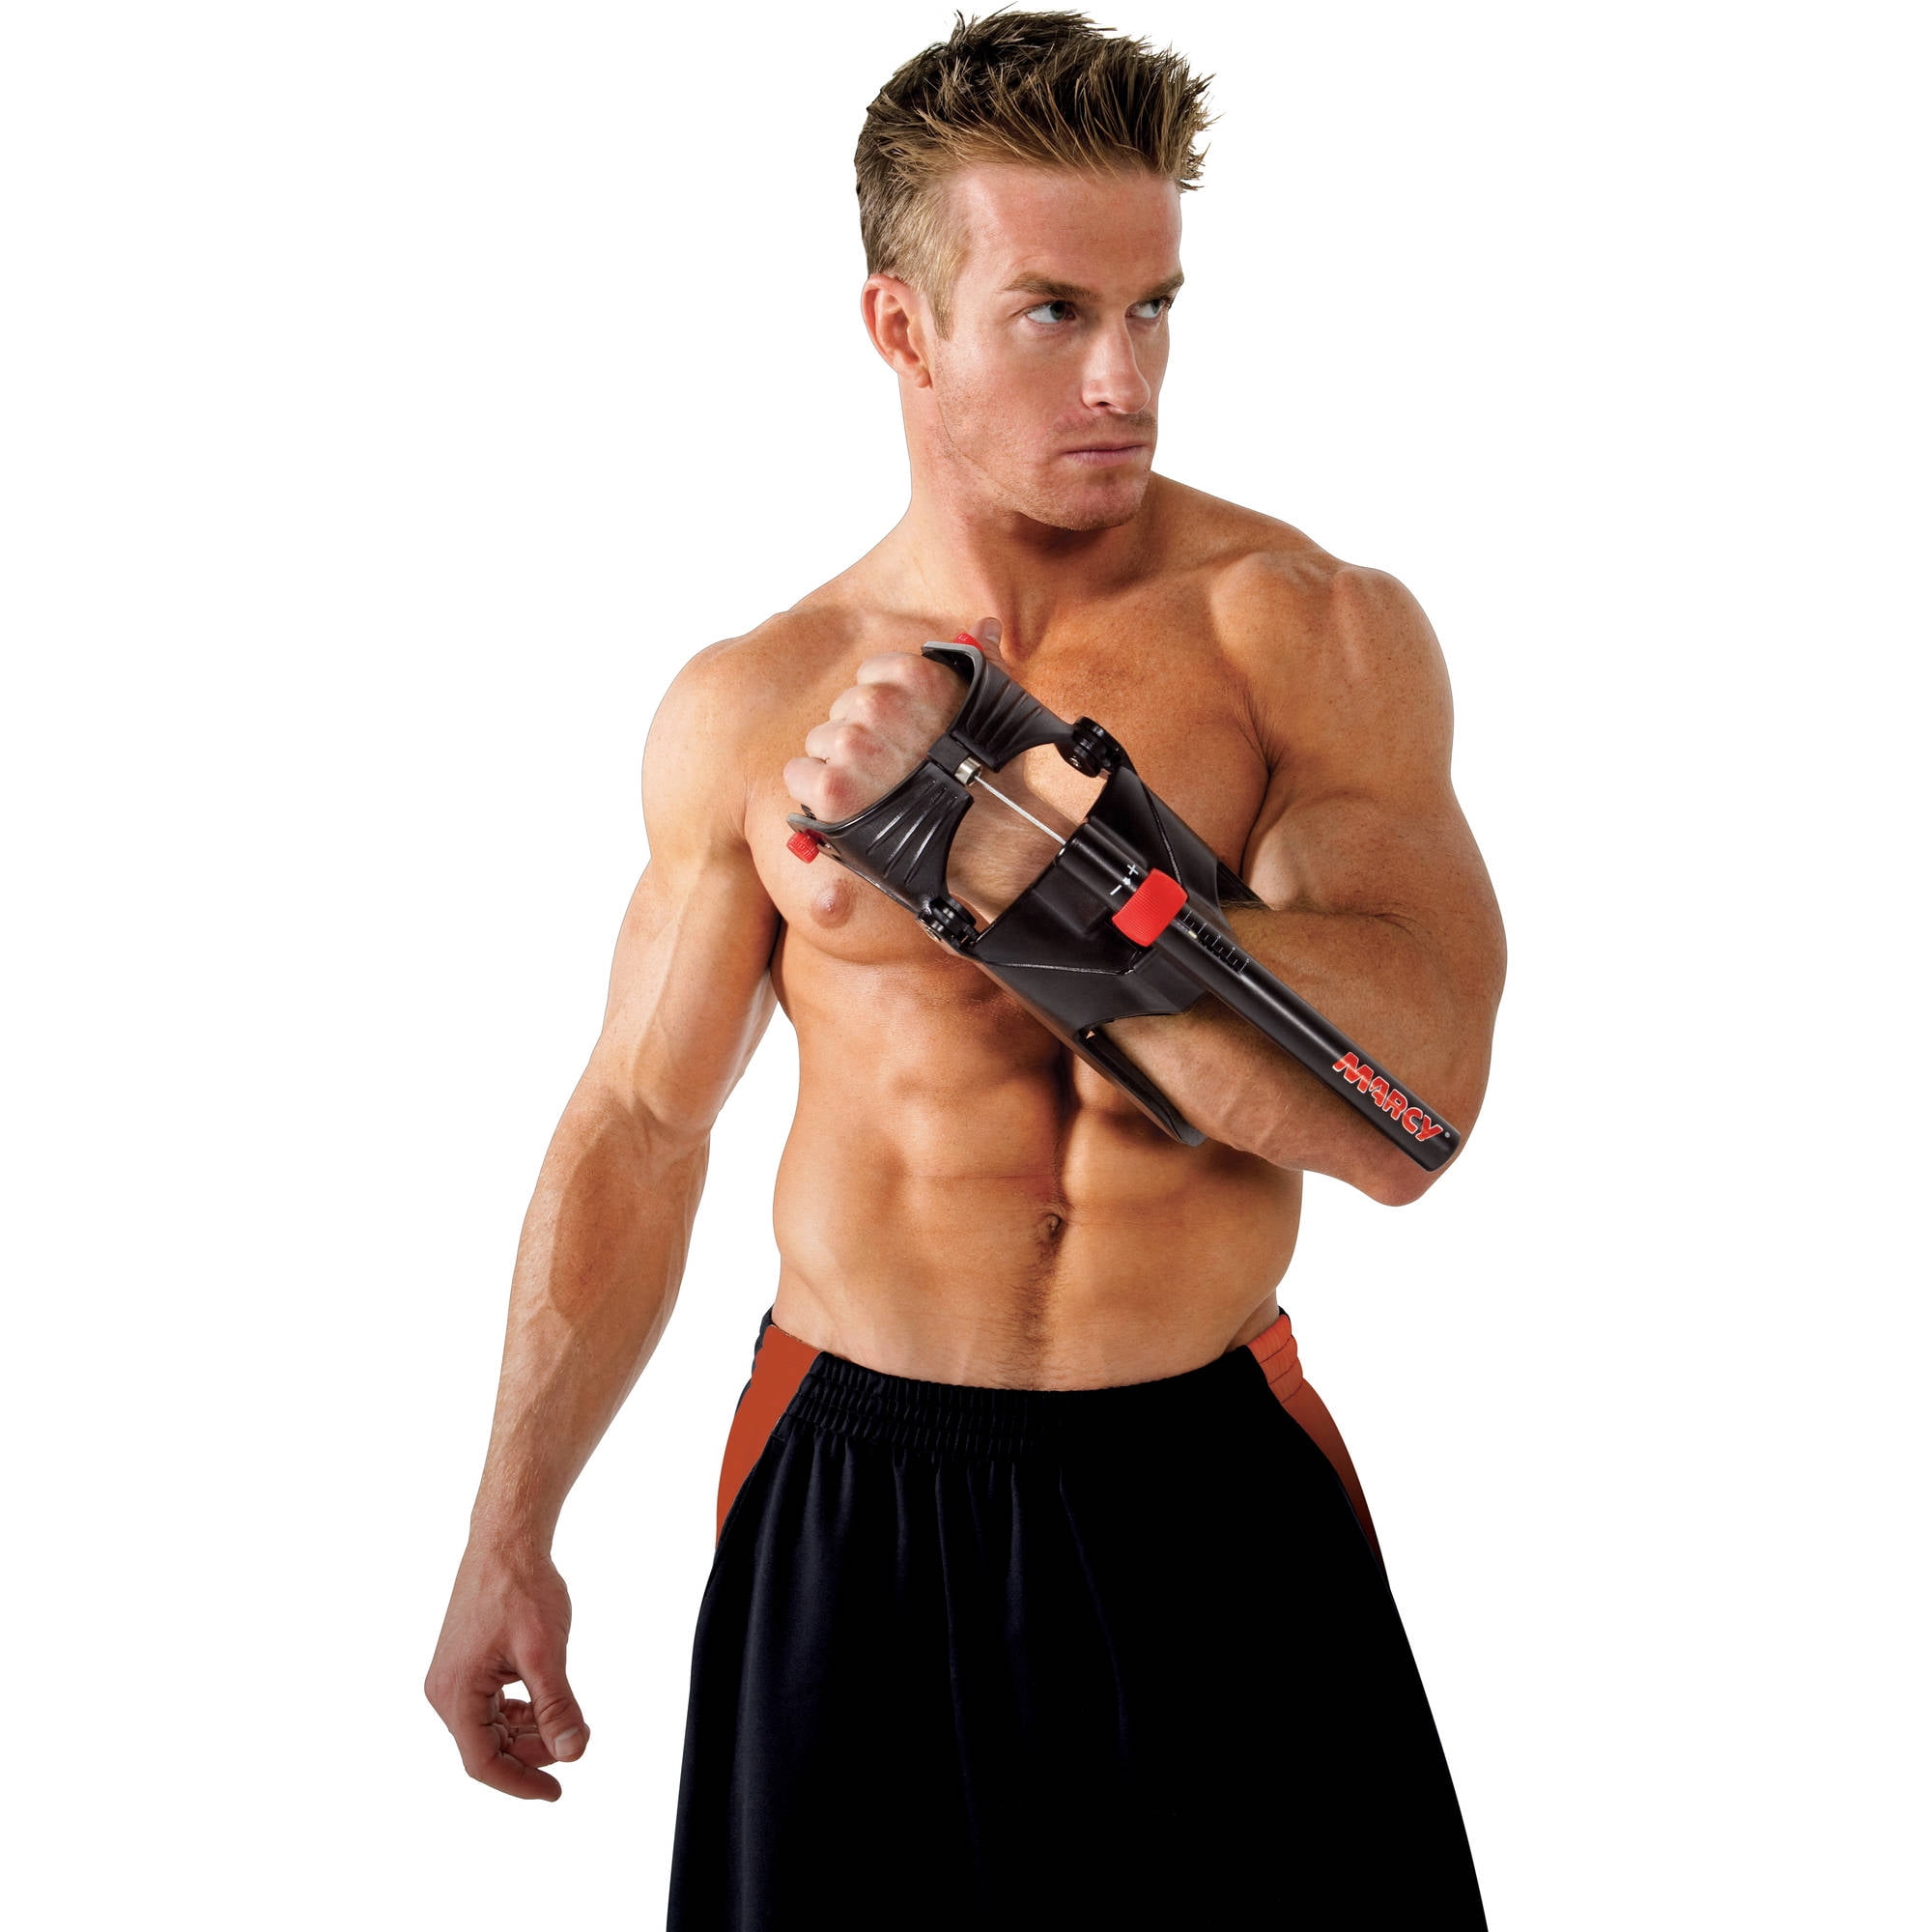 Finger Stretcher Wrists Hand Exerciser Strength Trainer Gripper Training Aid 